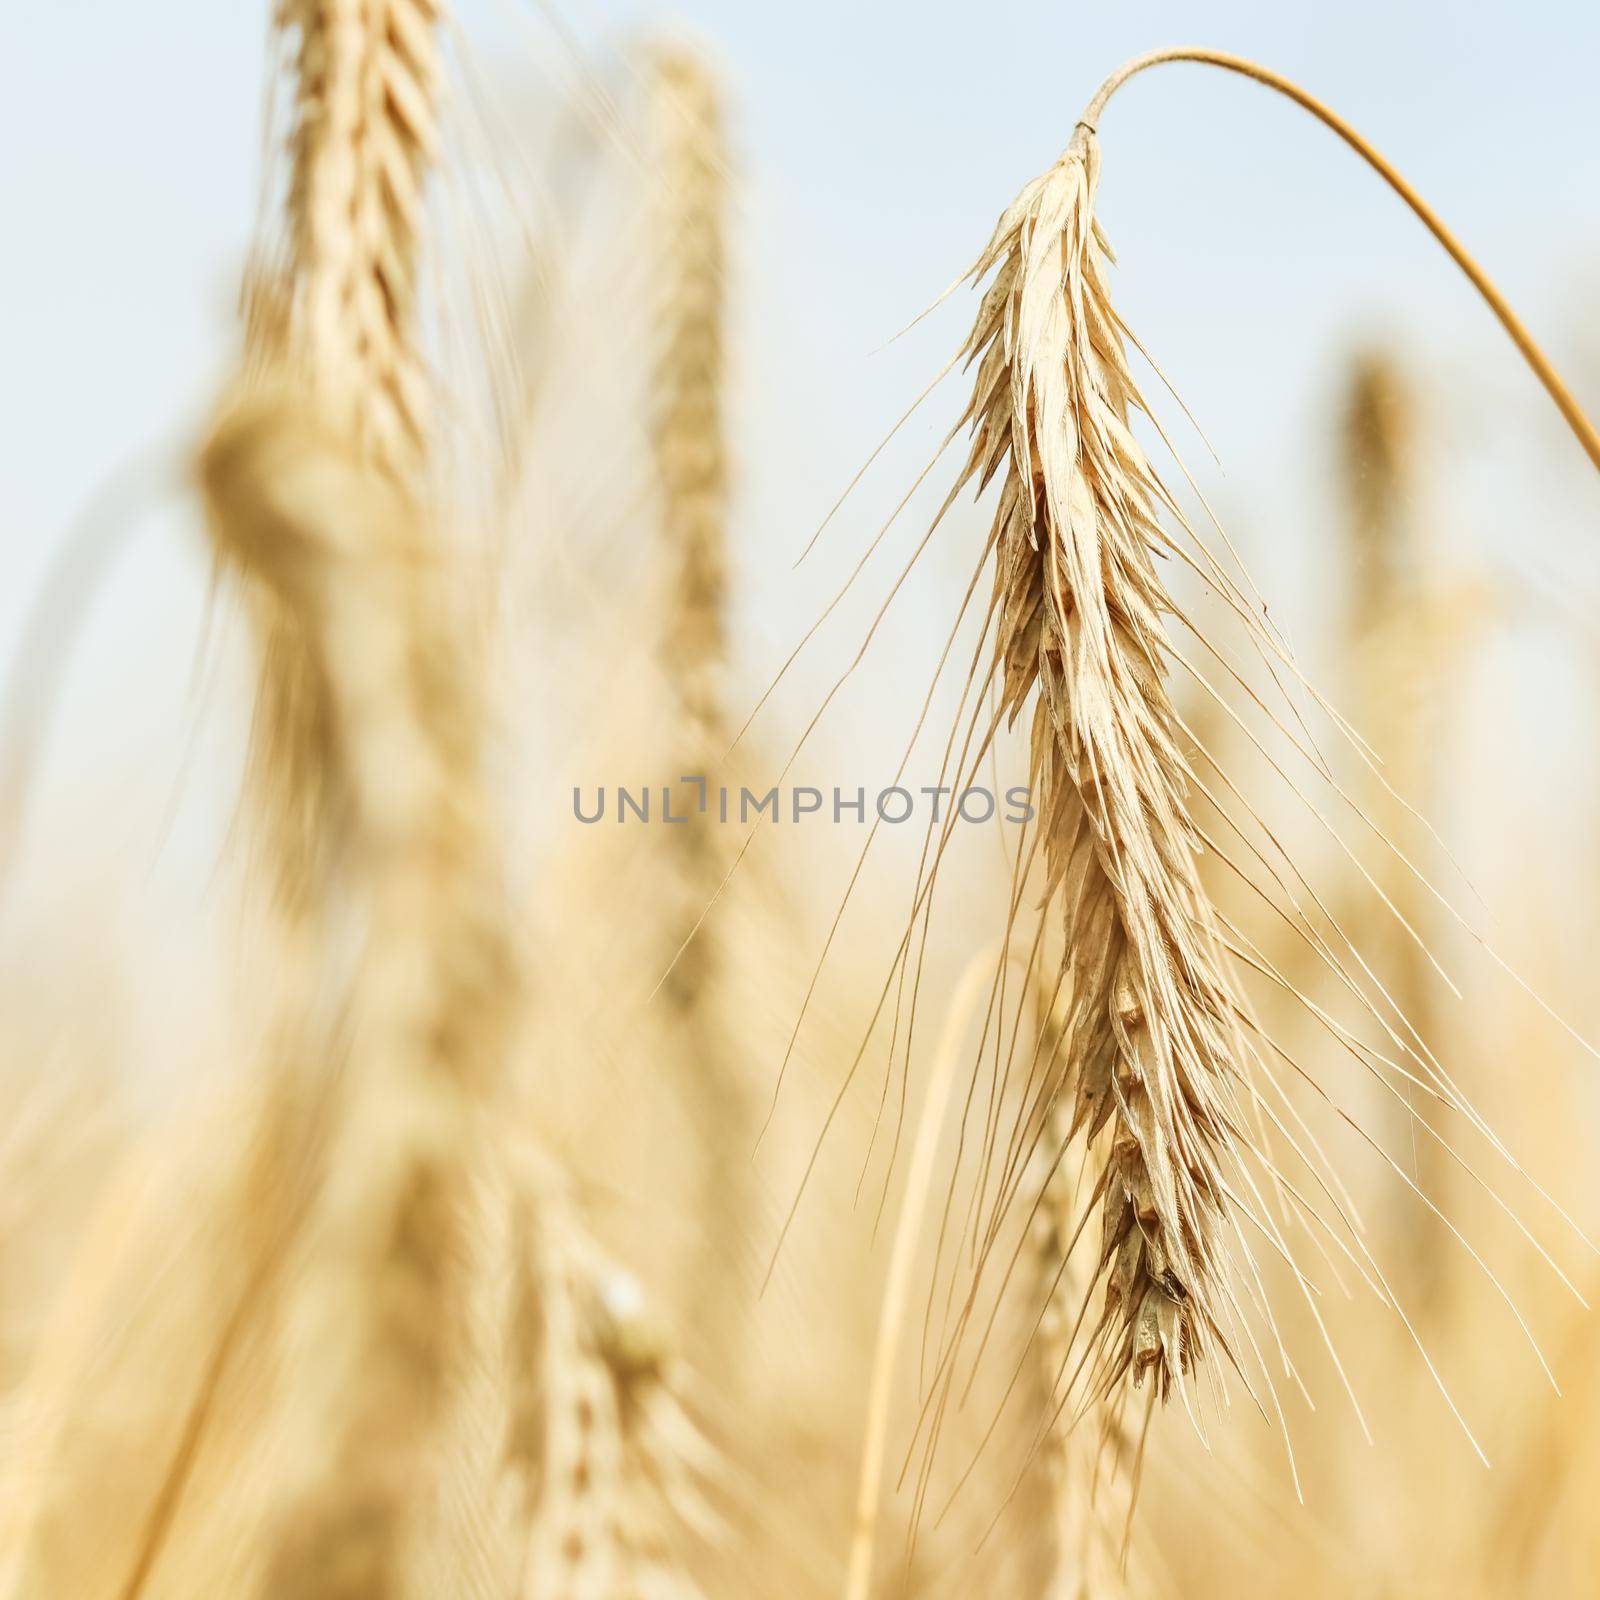 Dry ripe rye spicas of meadow field. Rural scenery, natural background. Agriculture, organic food production, harvest, healthy food, botany, nature, wallpaper concept. High quality photos